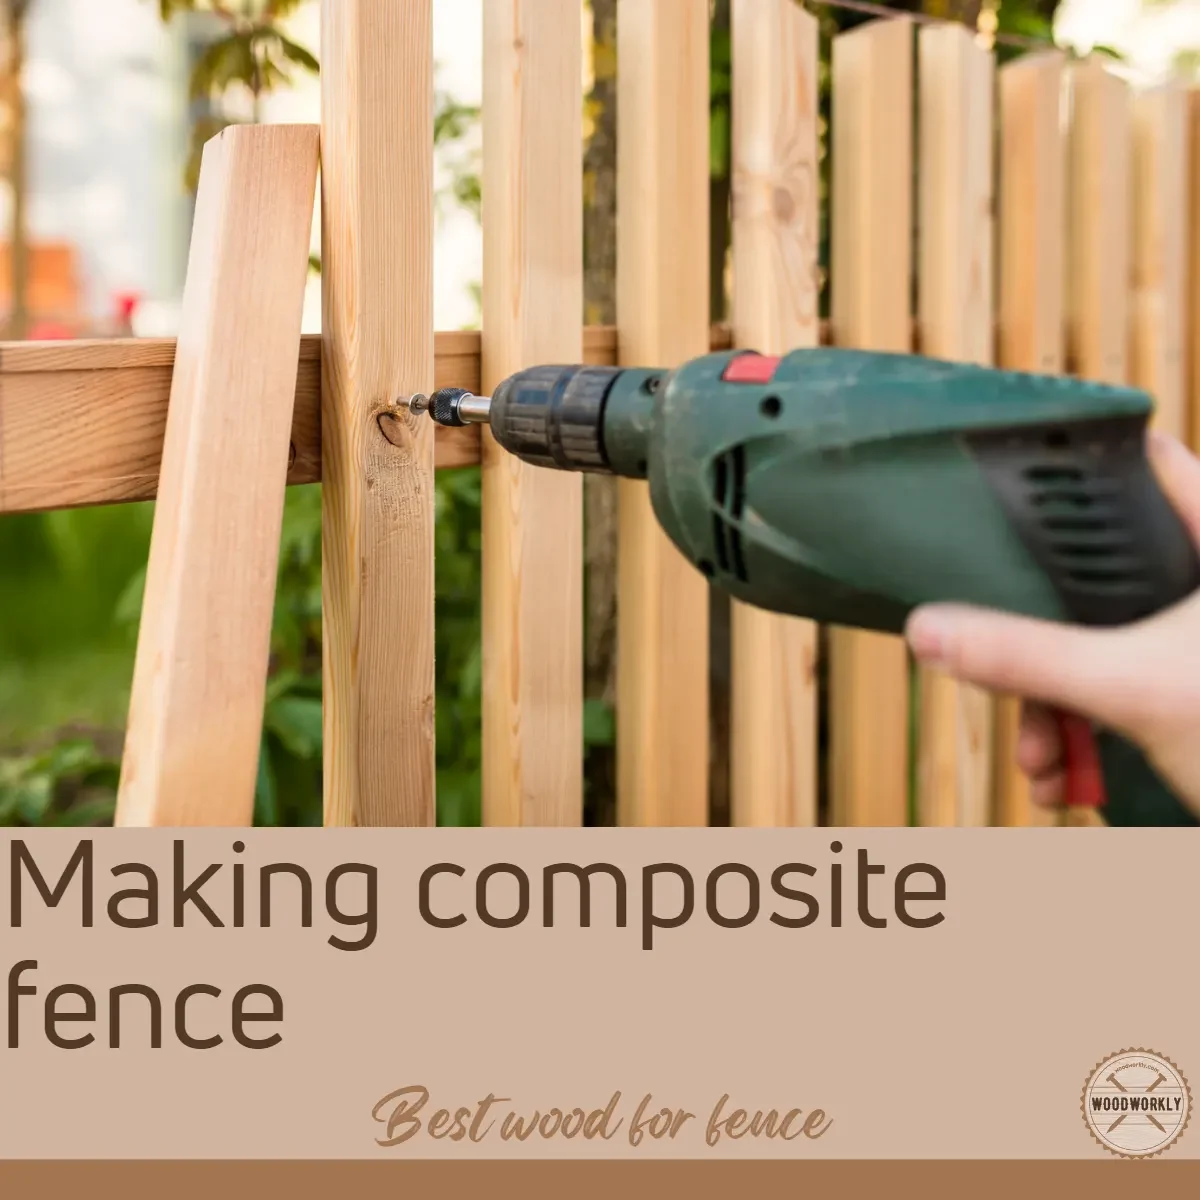 Making composite fence